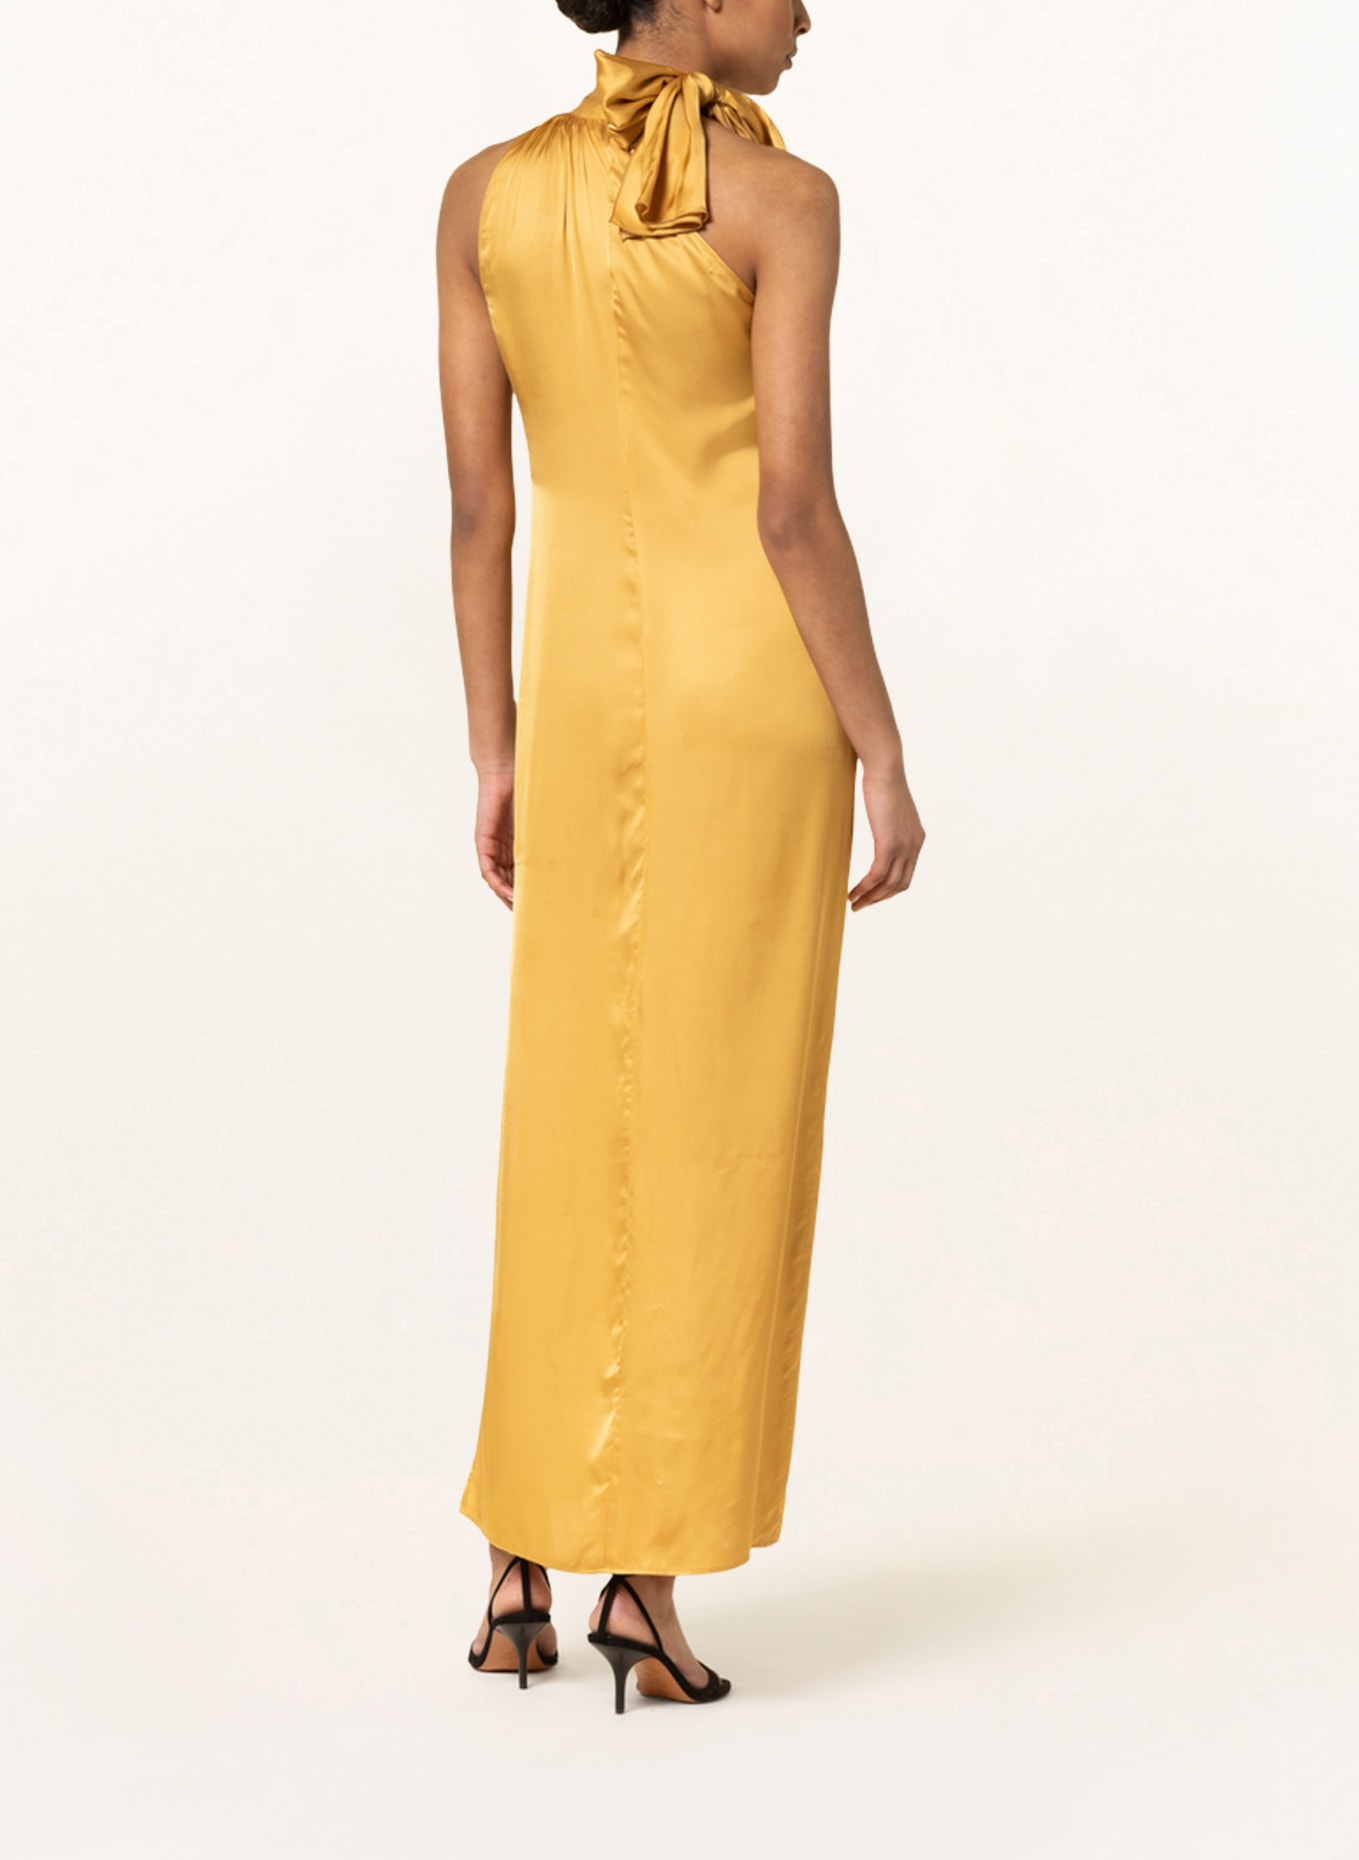 MAX & Co. One-shoulder dress MOSTRINA made of satin, Color: DARK YELLOW (Image 3)